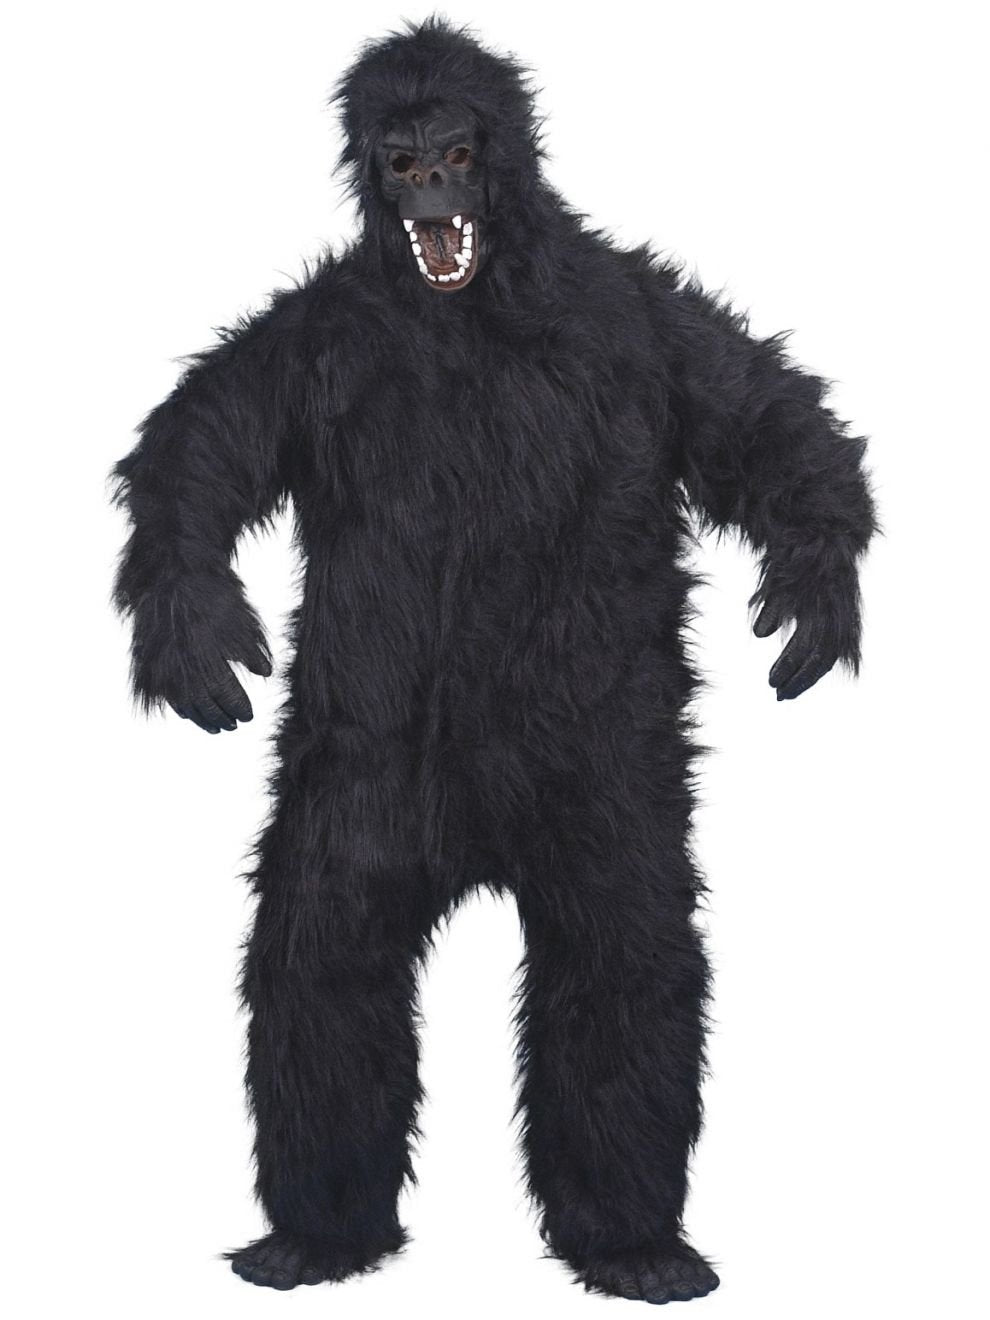 Costume Gorilla Black One Size W/ Mask, Hands And Feet